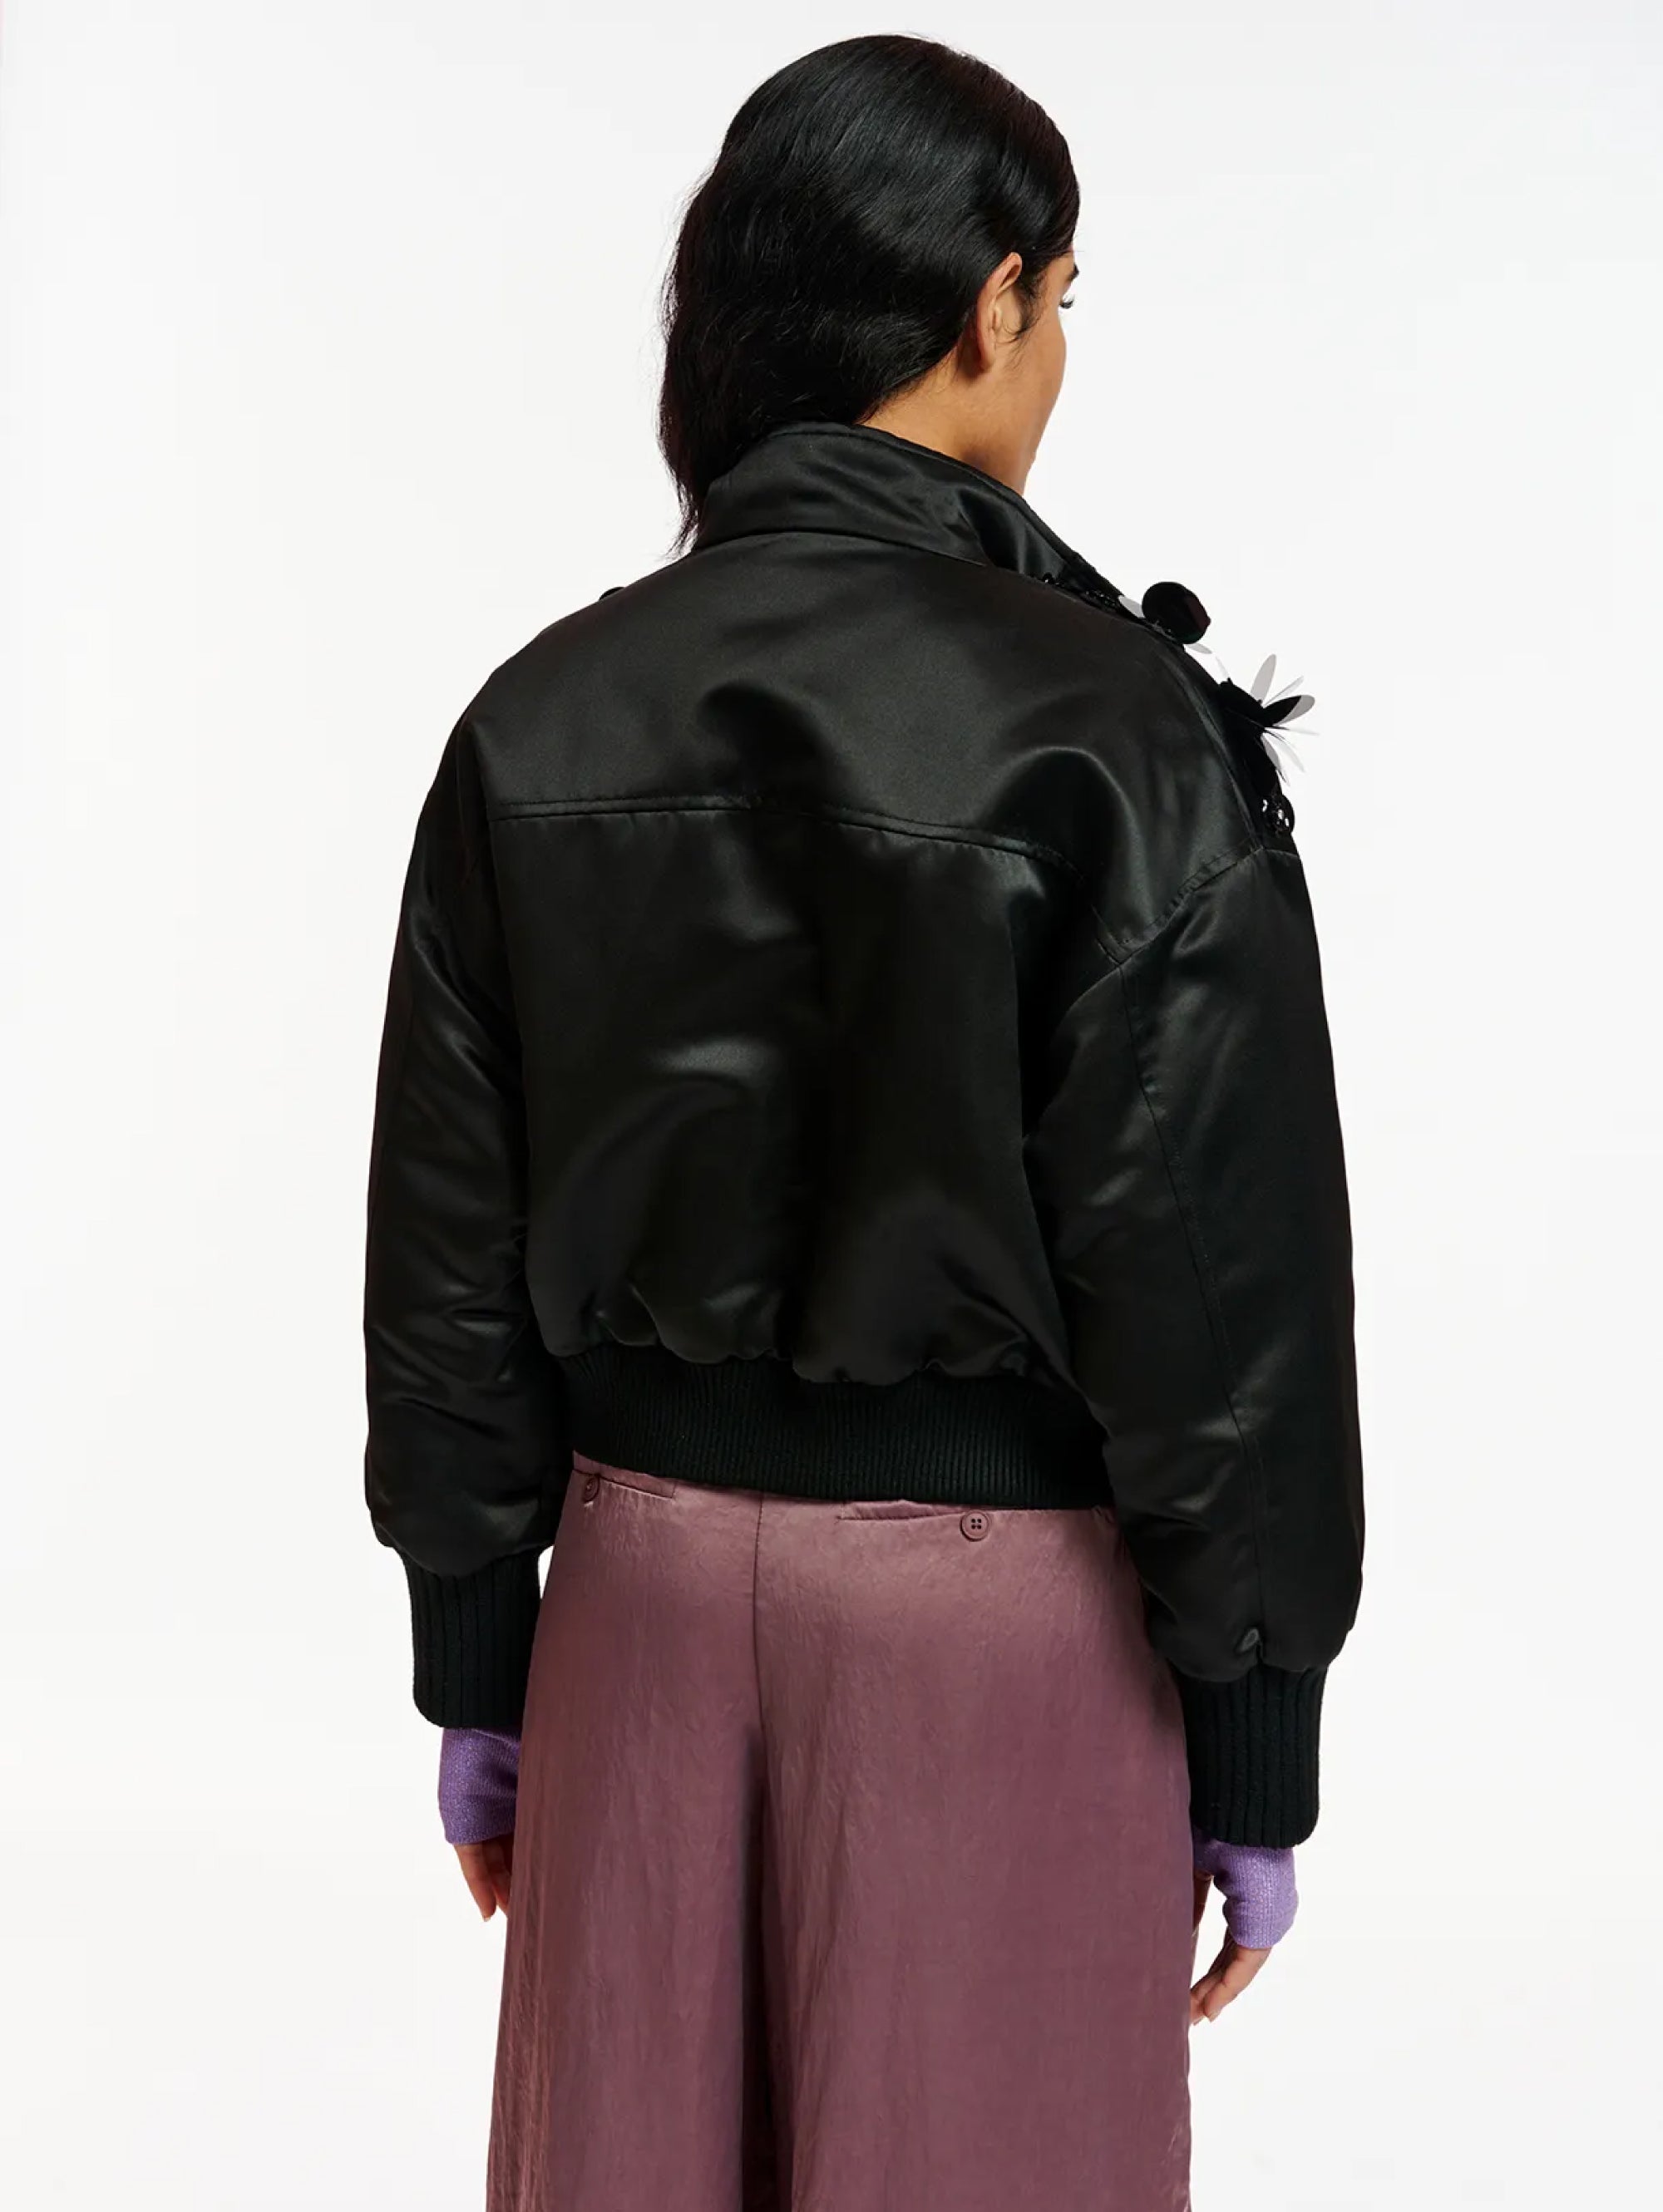 Satin bomber jacket with black sequins and rhinestones